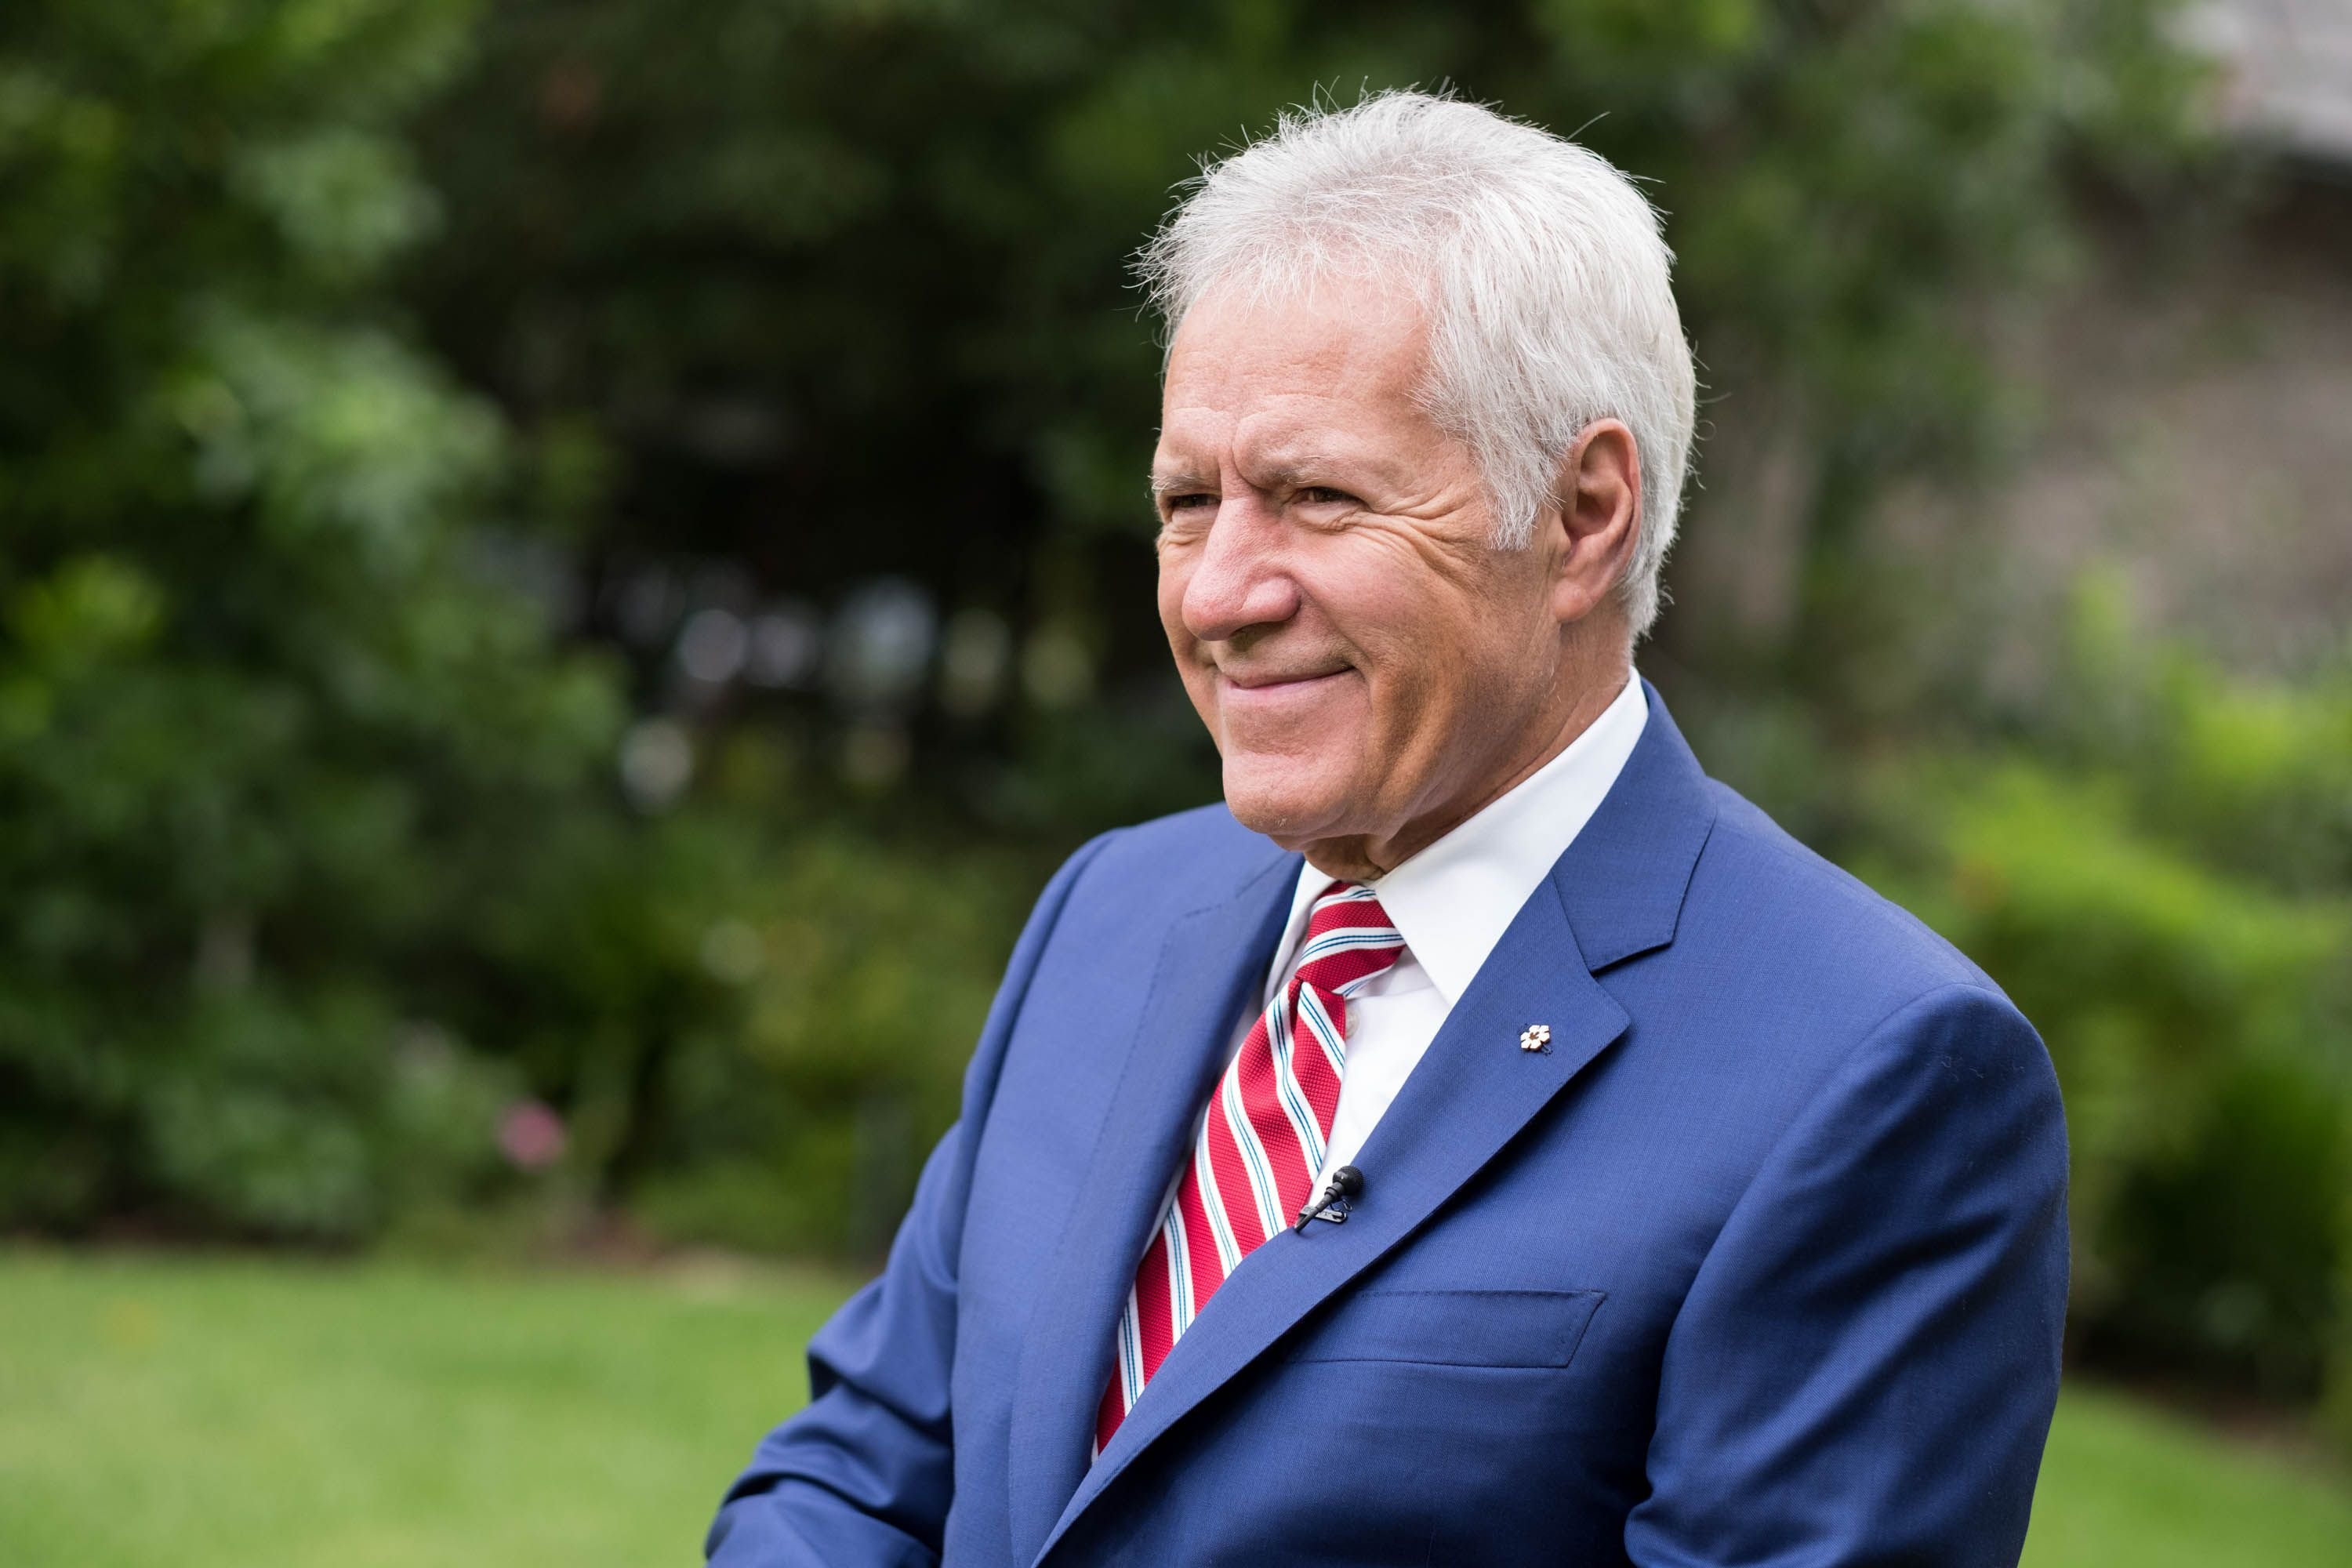 Alex Trebek at the 150th anniversary of Canada's Confederation at the Official Residence of Canada on June 30, 2017 | Photo: Getty Images